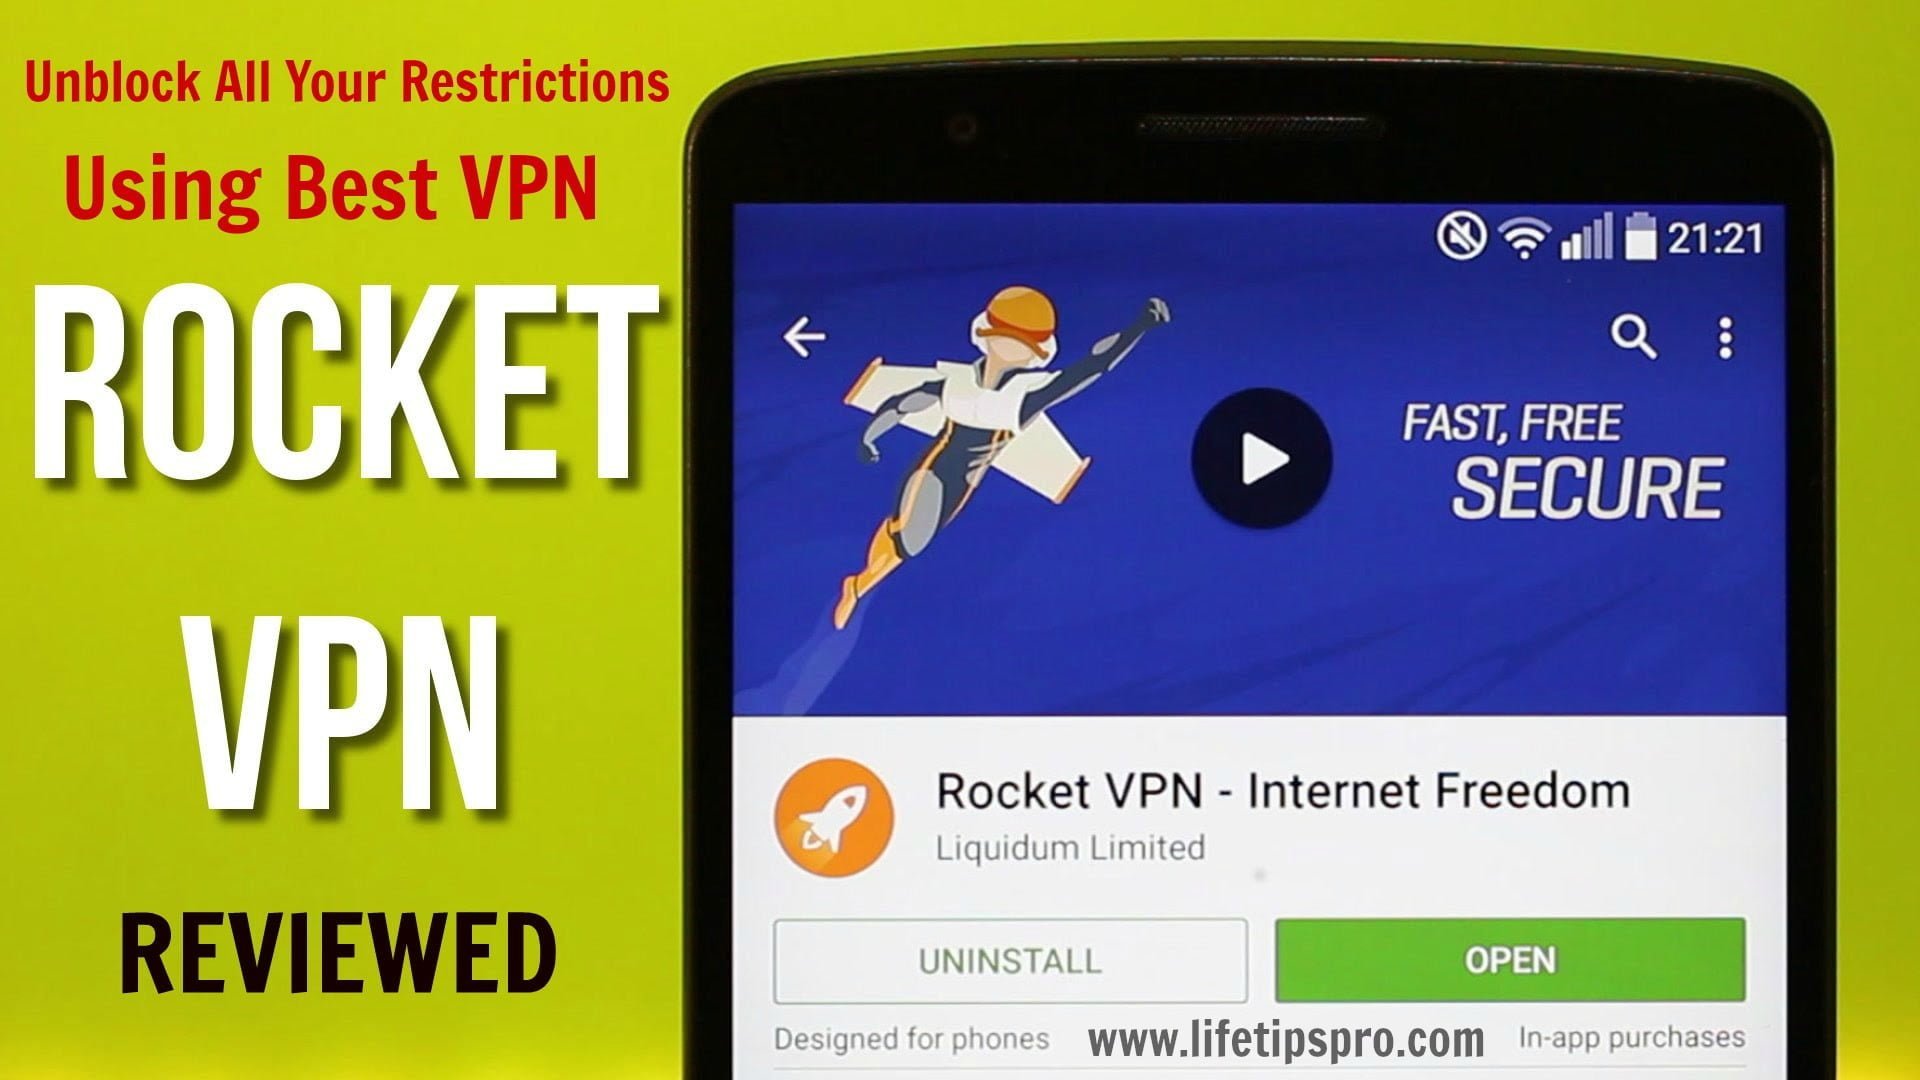 rocket-Vpn-review-detailed-pros-cons